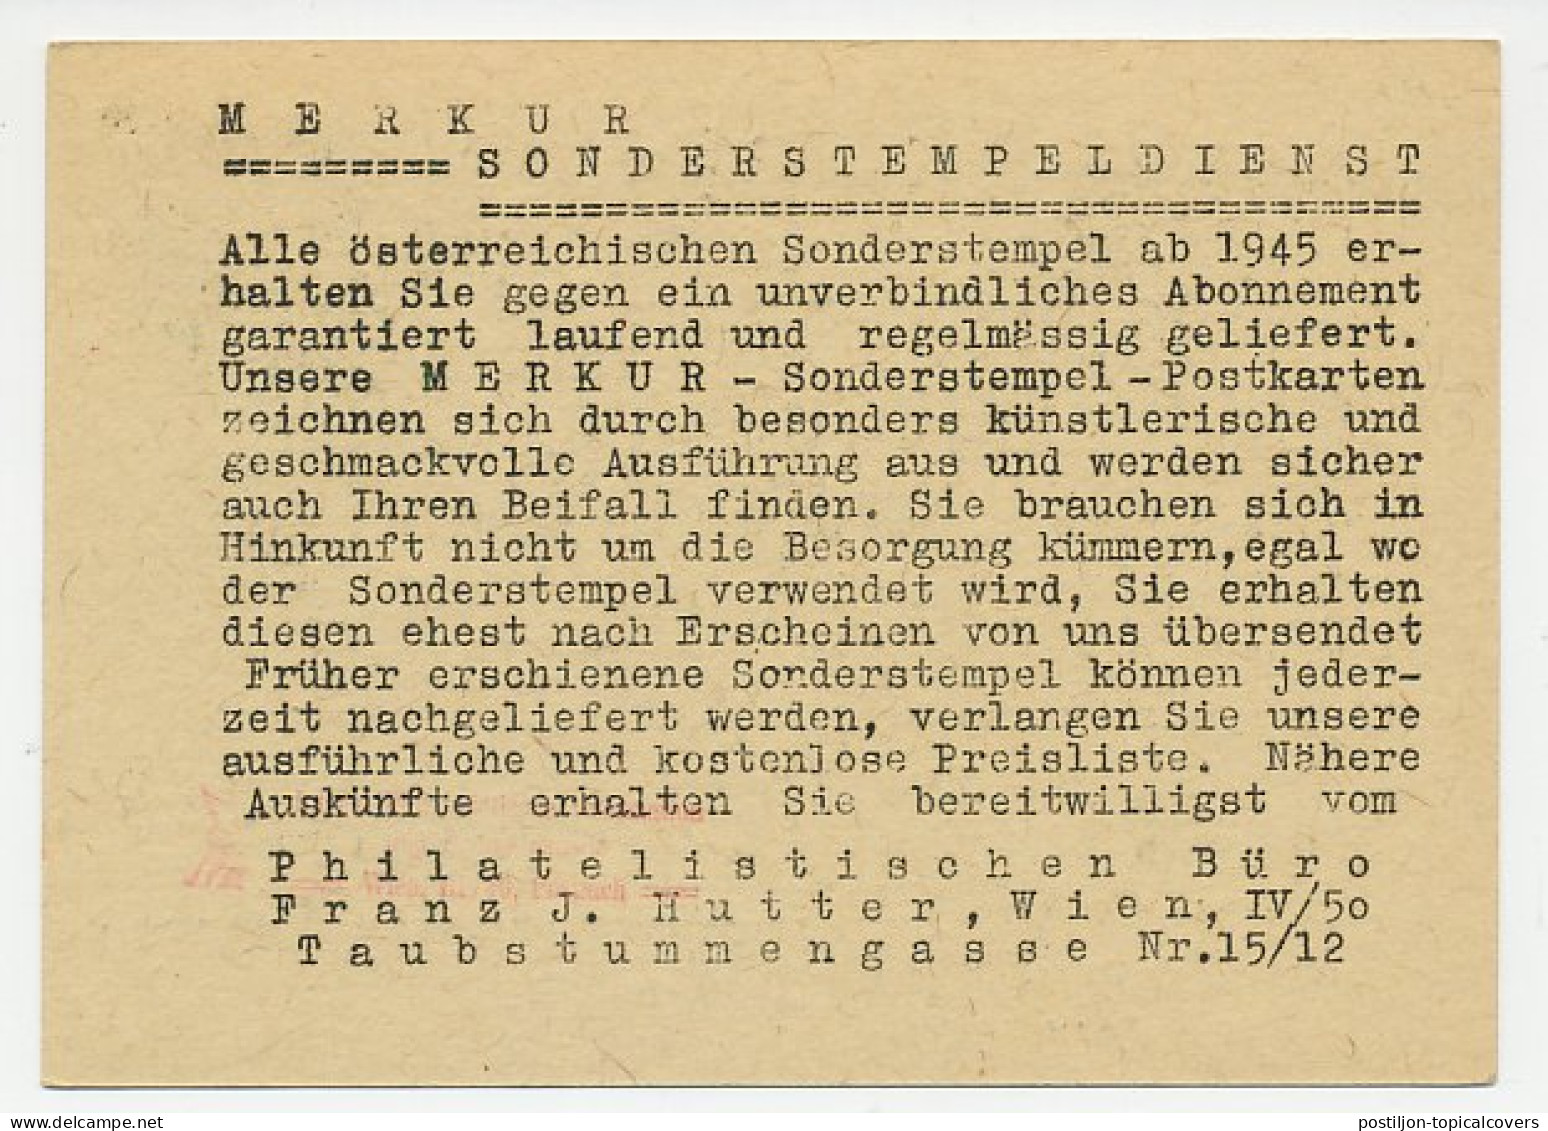 Card / Postmark Austria 1946 Sports Festival - Worthersee - Other & Unclassified